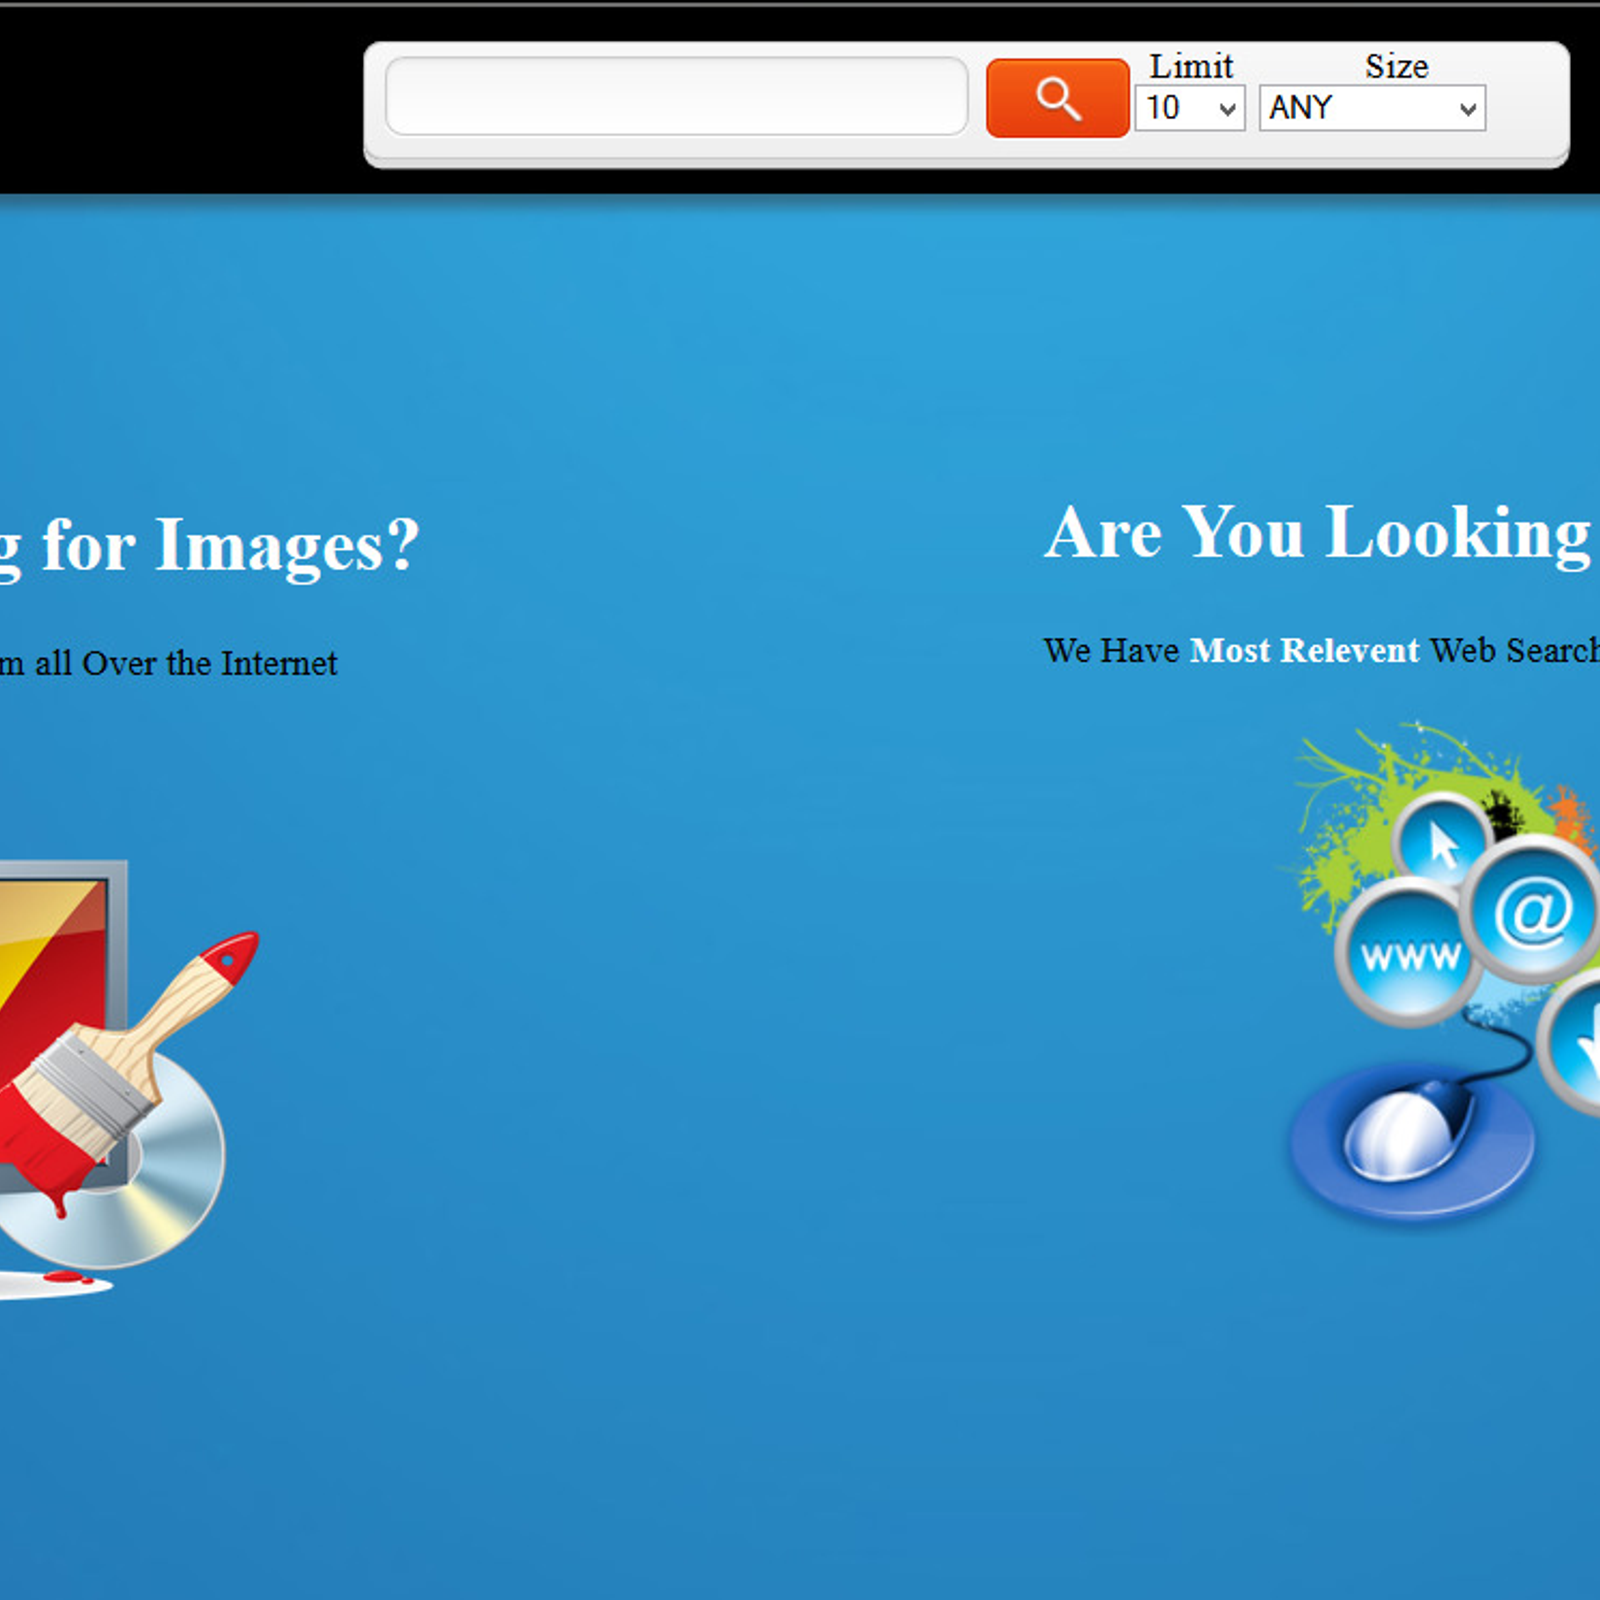 Driverlayer Image Search Engine Alternatives And Similar Websites And